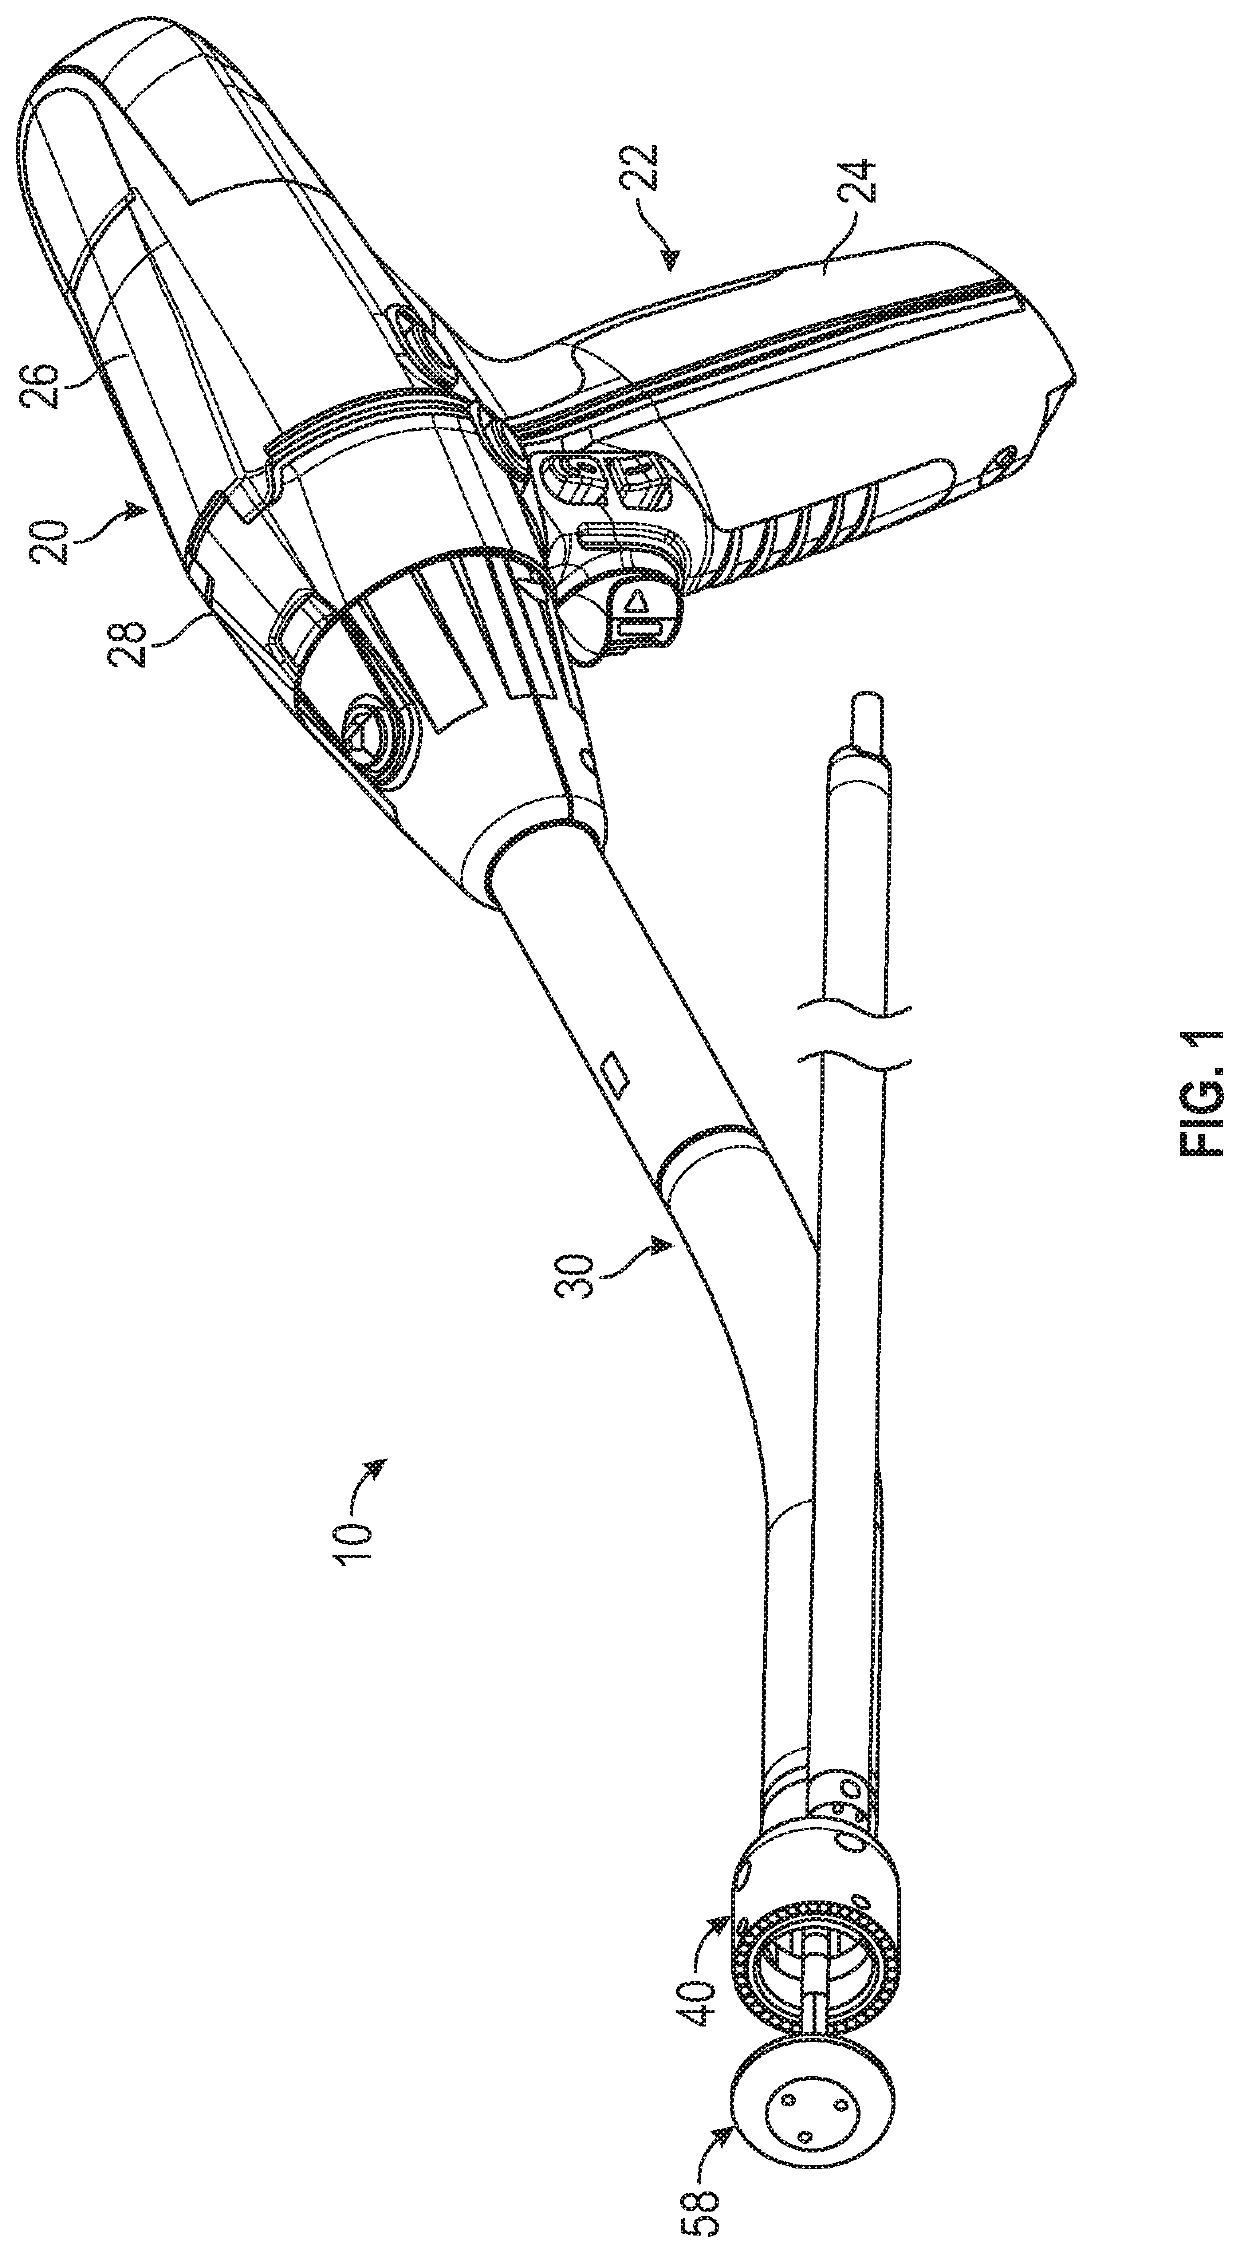 Strain gauge stabilization in a surgical device